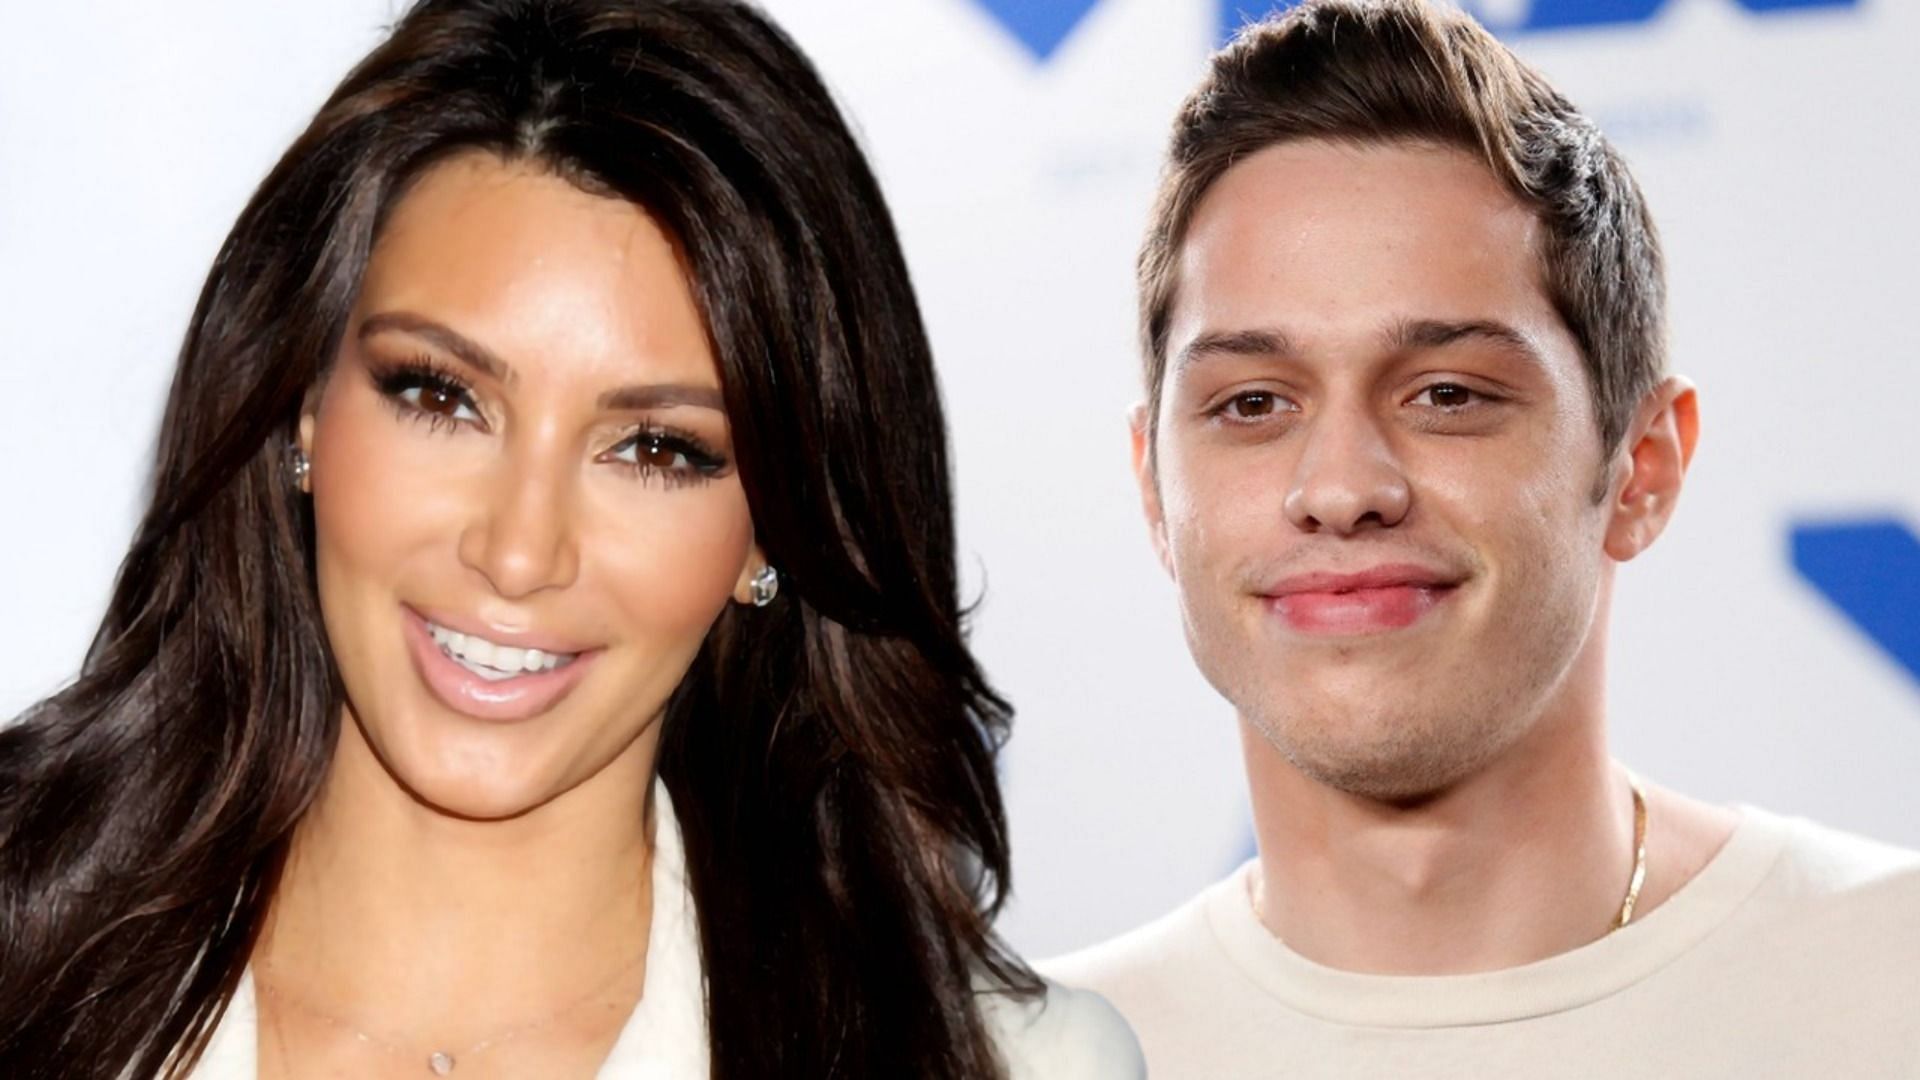 Kim Kardashian and Pete Davidson were spotted walking hand-in-hand in Palm Springs (Image via Getty Images)